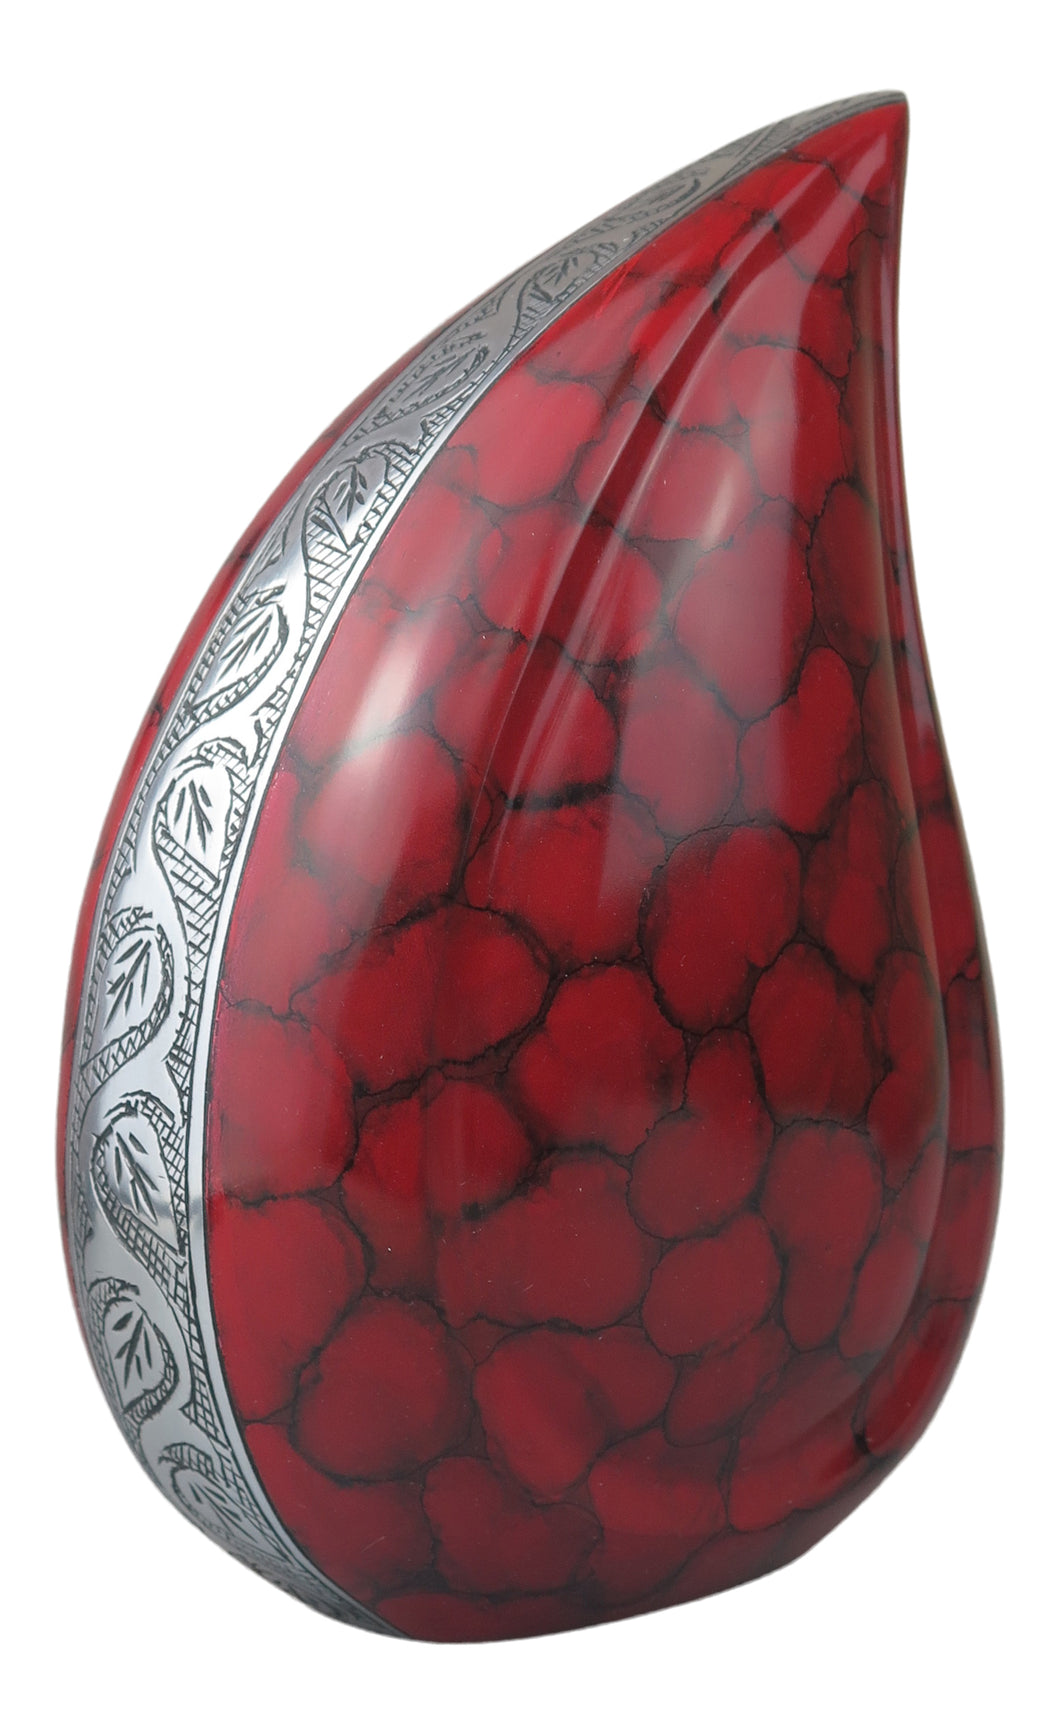 Large Red Teardrop Urn for Adult or Pet Dog Ashes | Love to Treasure